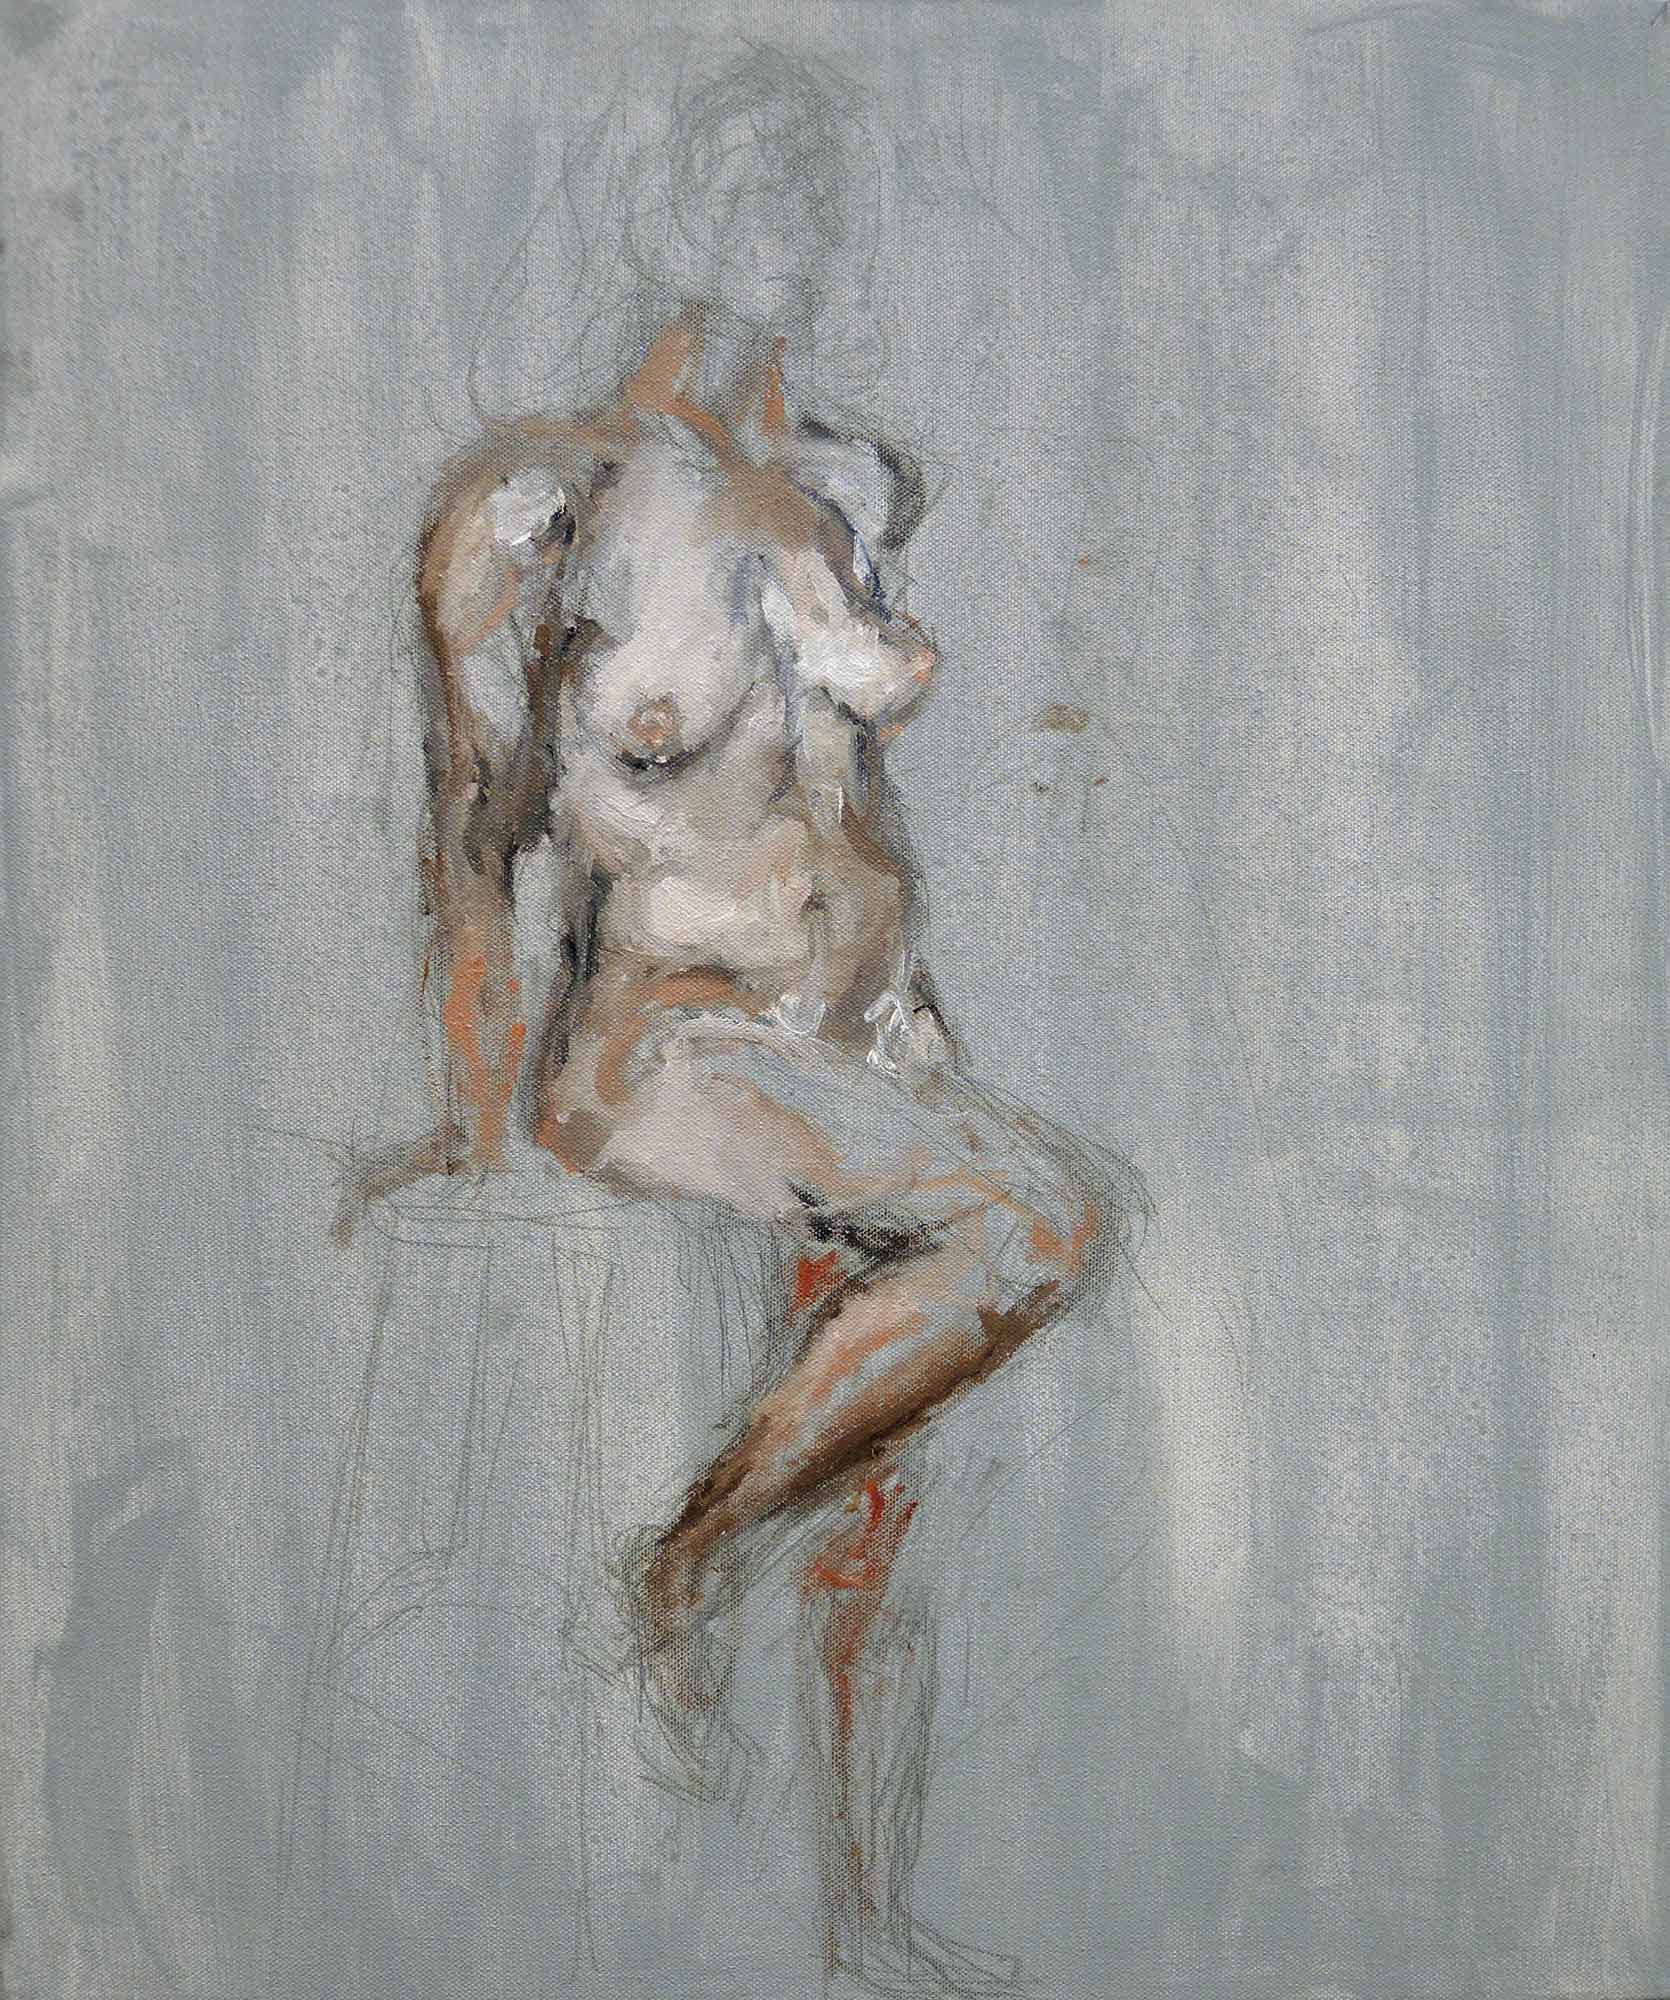 A painting of a nude